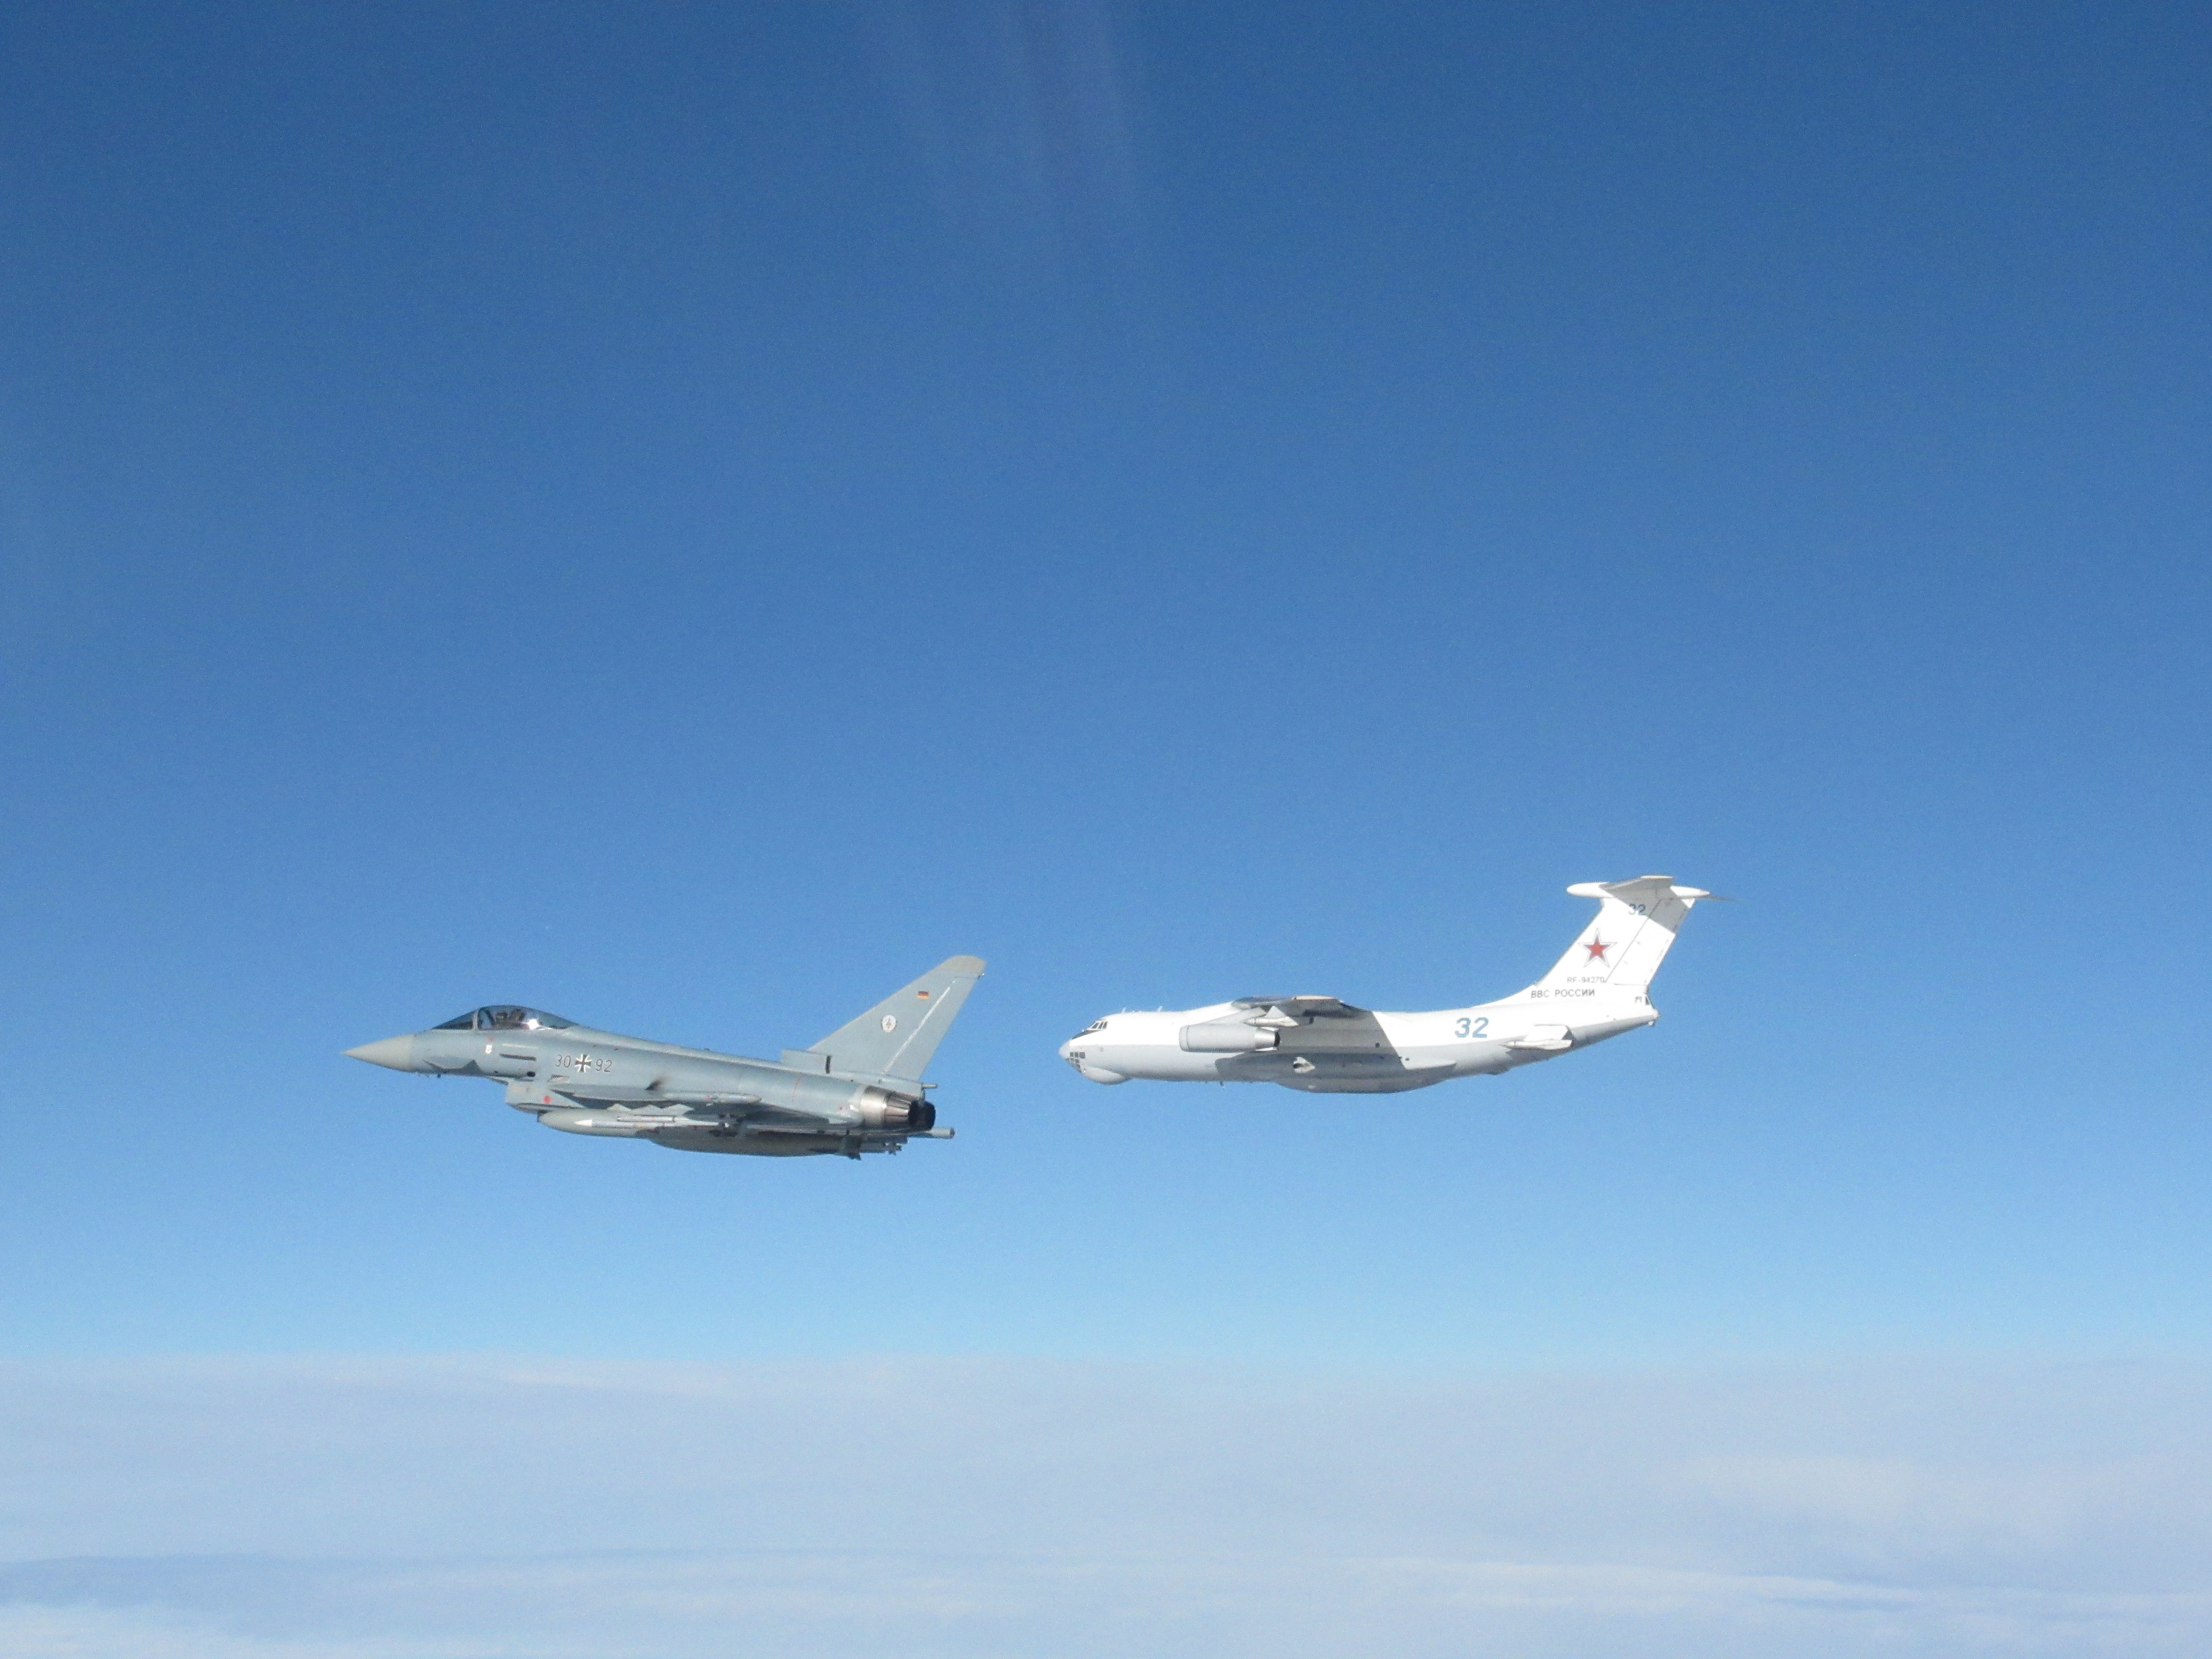 Images shows RAF Typhoon and Russian Ilyushin Il-78 Midas aircraft in flight above clouds.